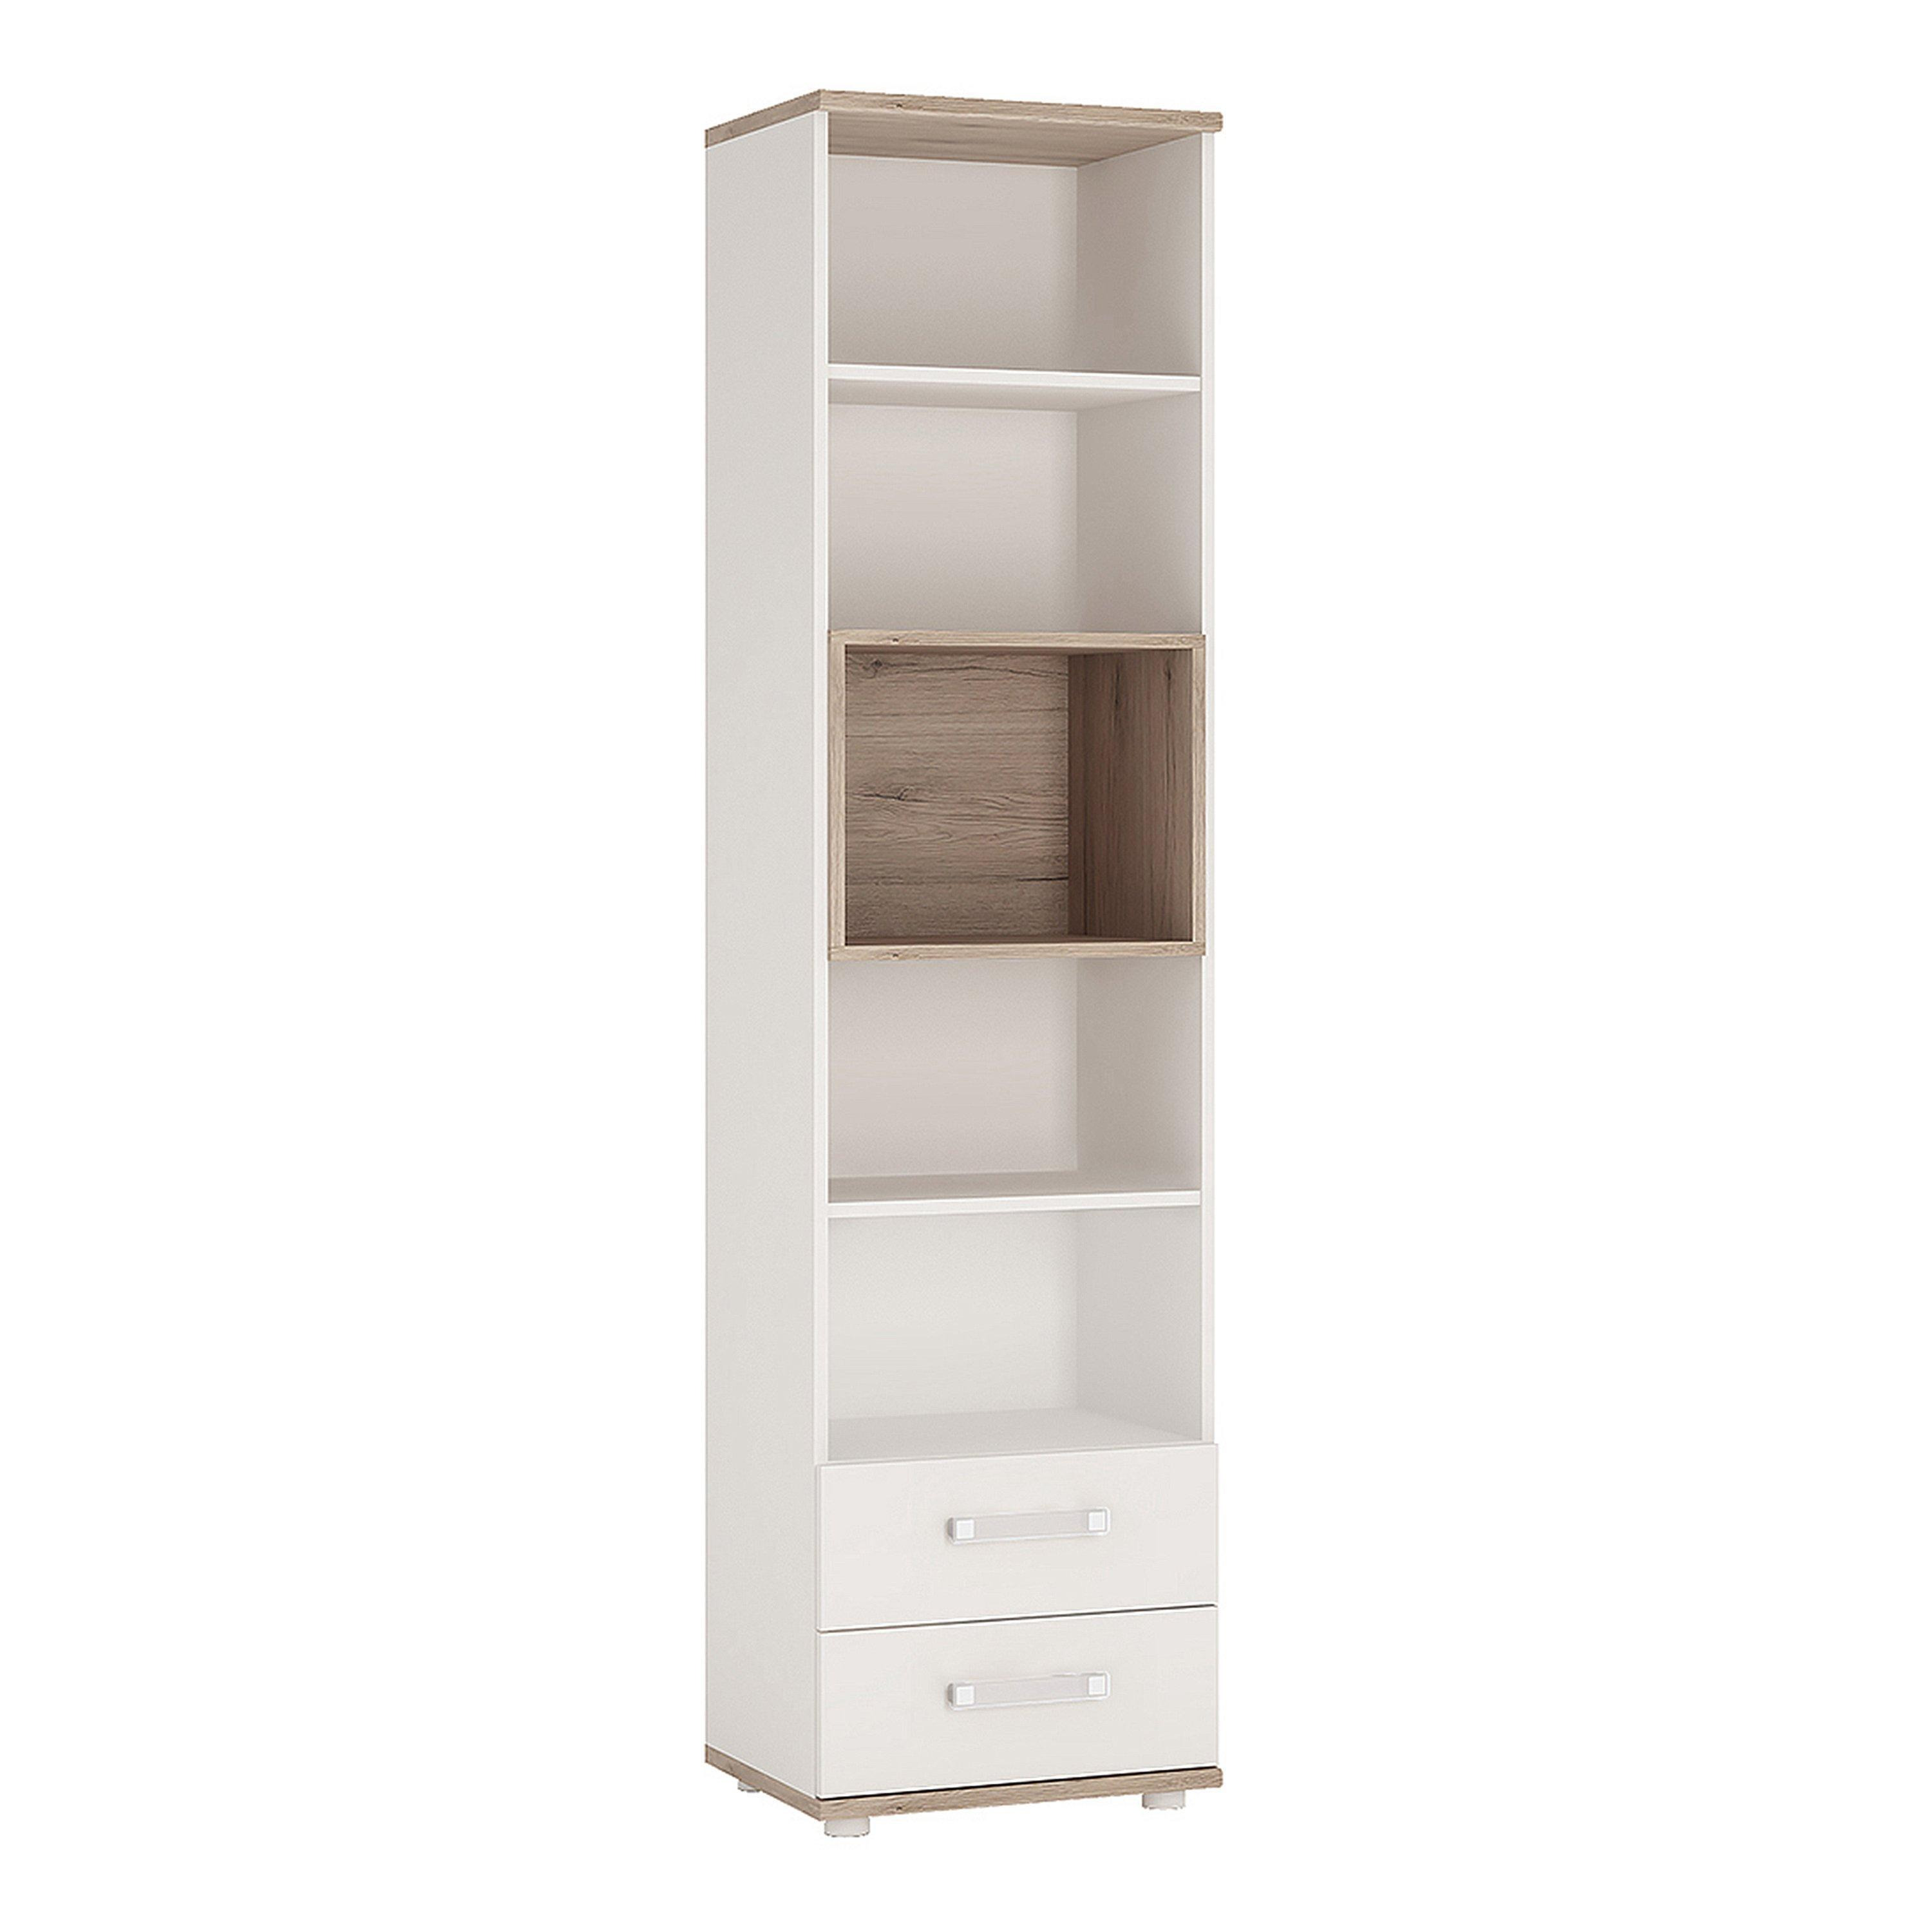 4KIDS Tall 2 Drawer Bookcase - image 1